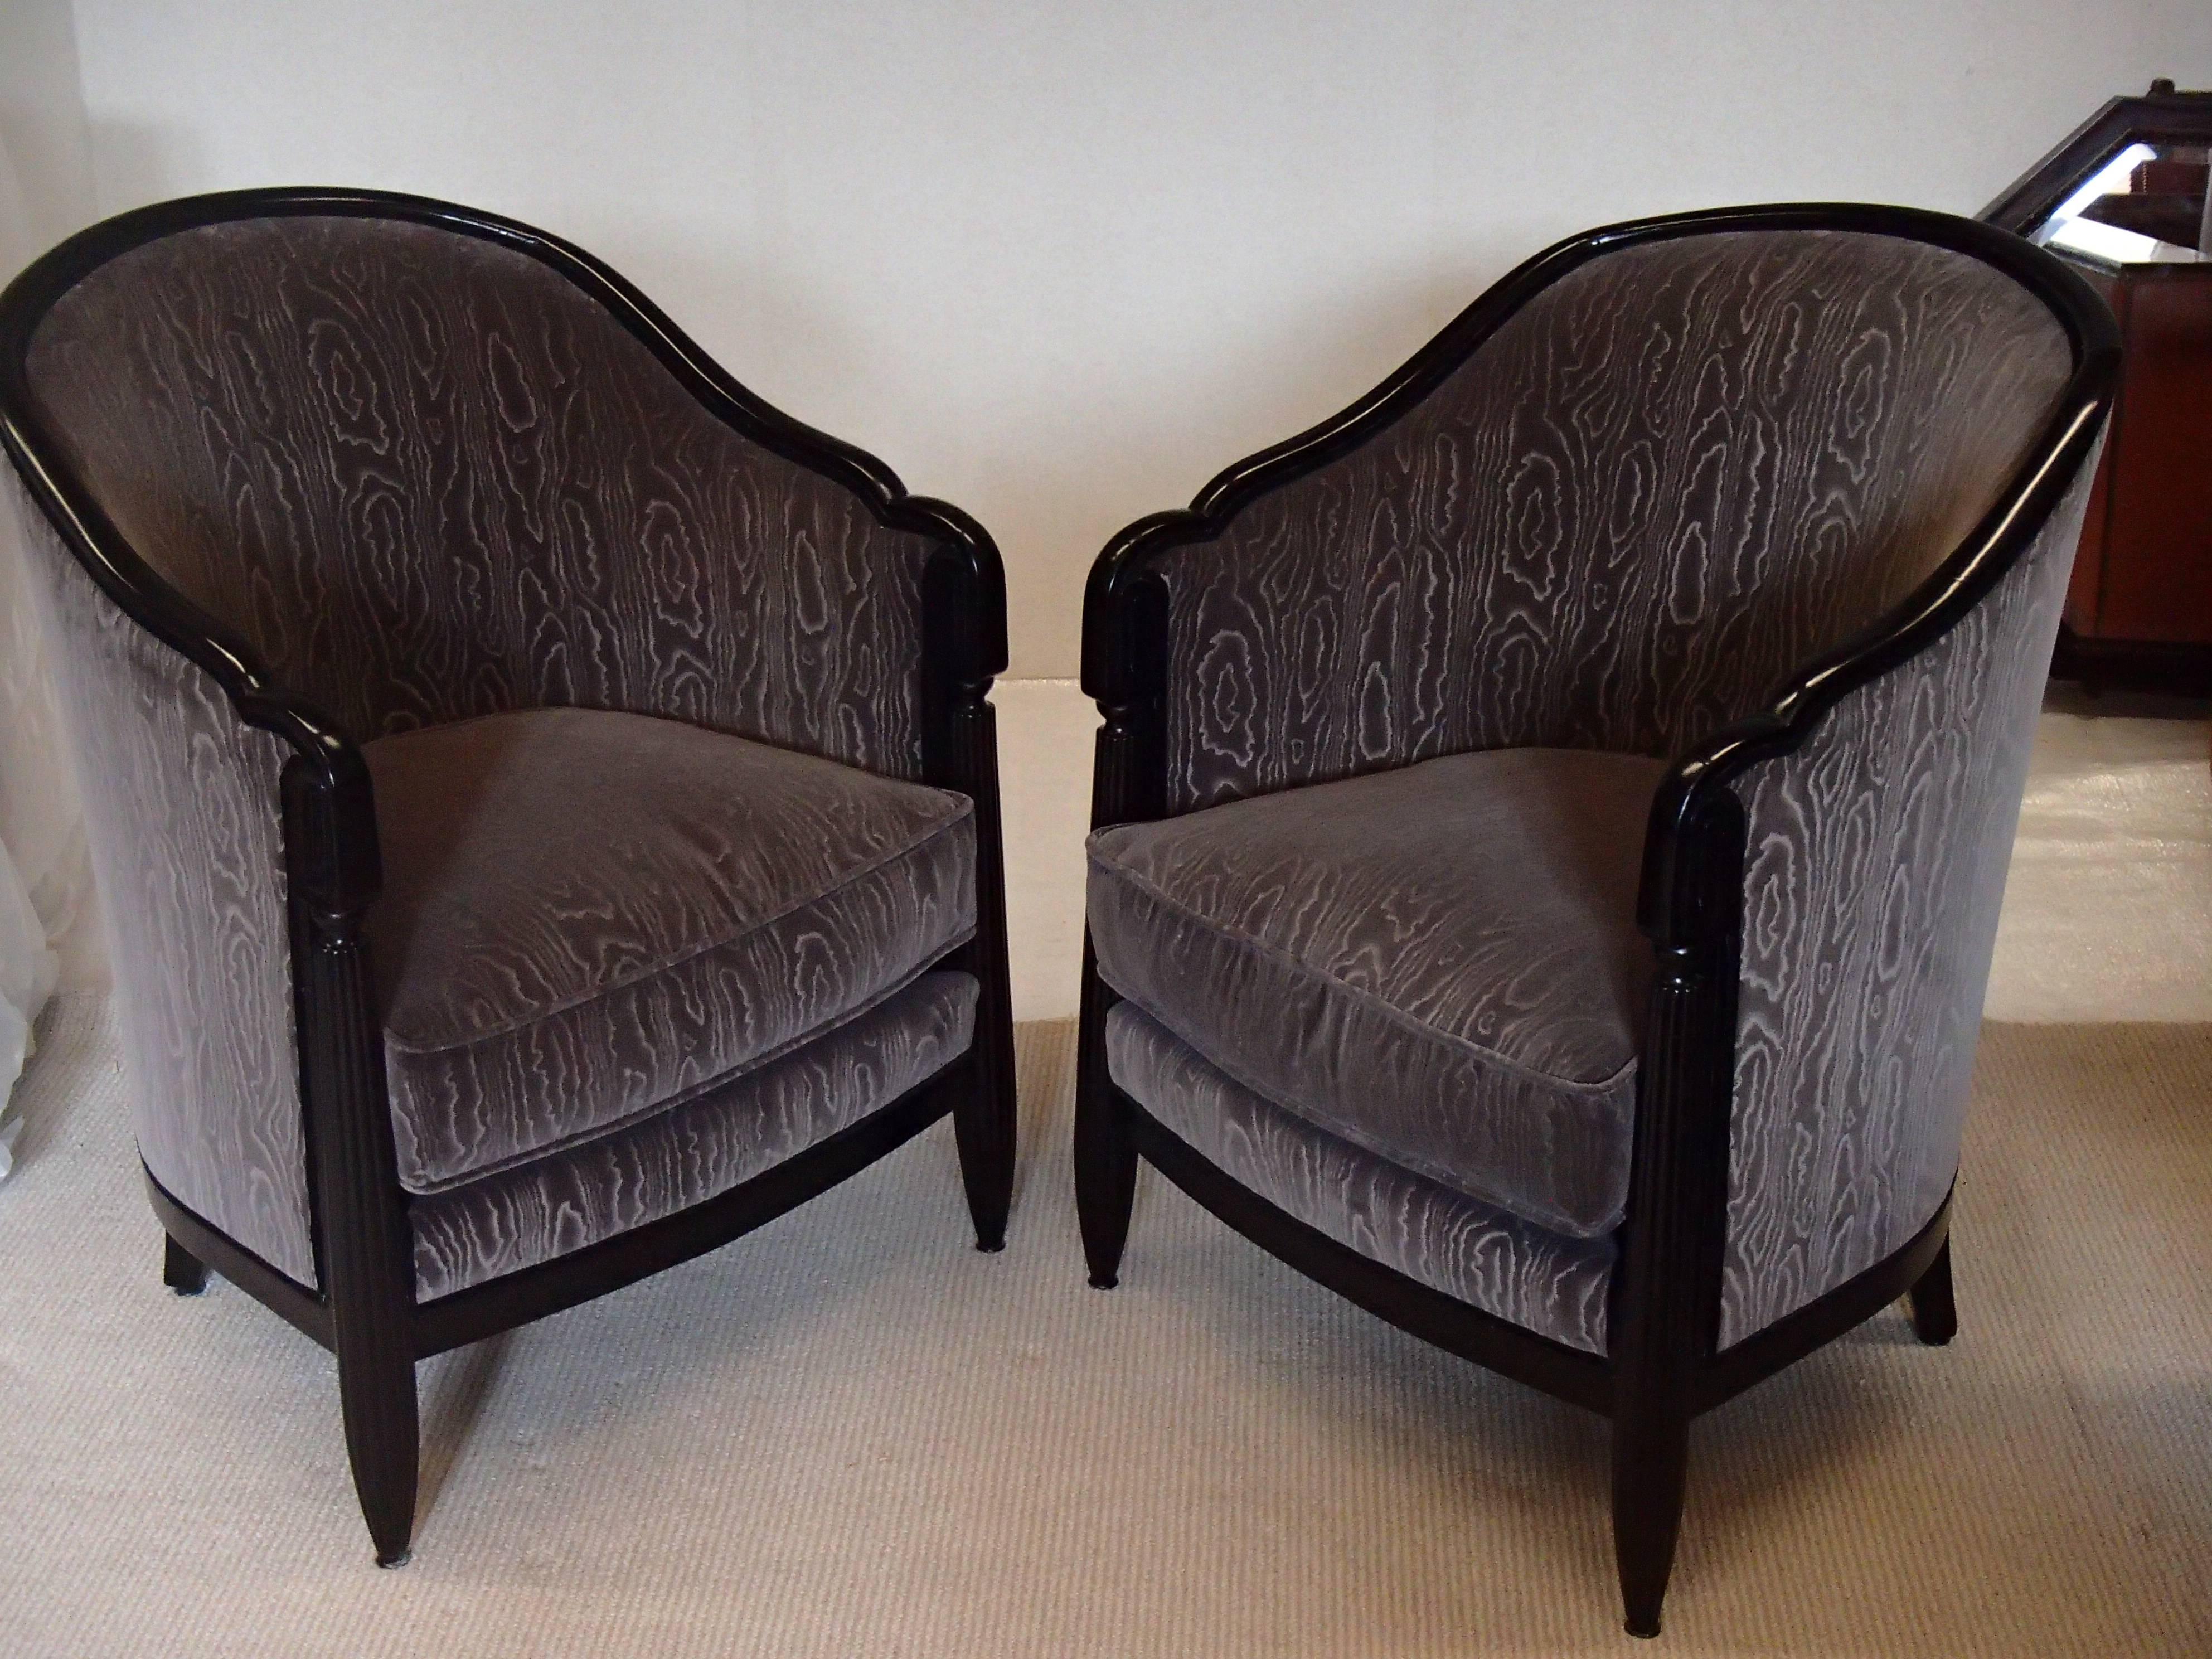 Pair of 1920 armchairs bérgères restored with black shellac and reupholstered and recovered with a anthracite moire velvet. Cushions are both side usable.